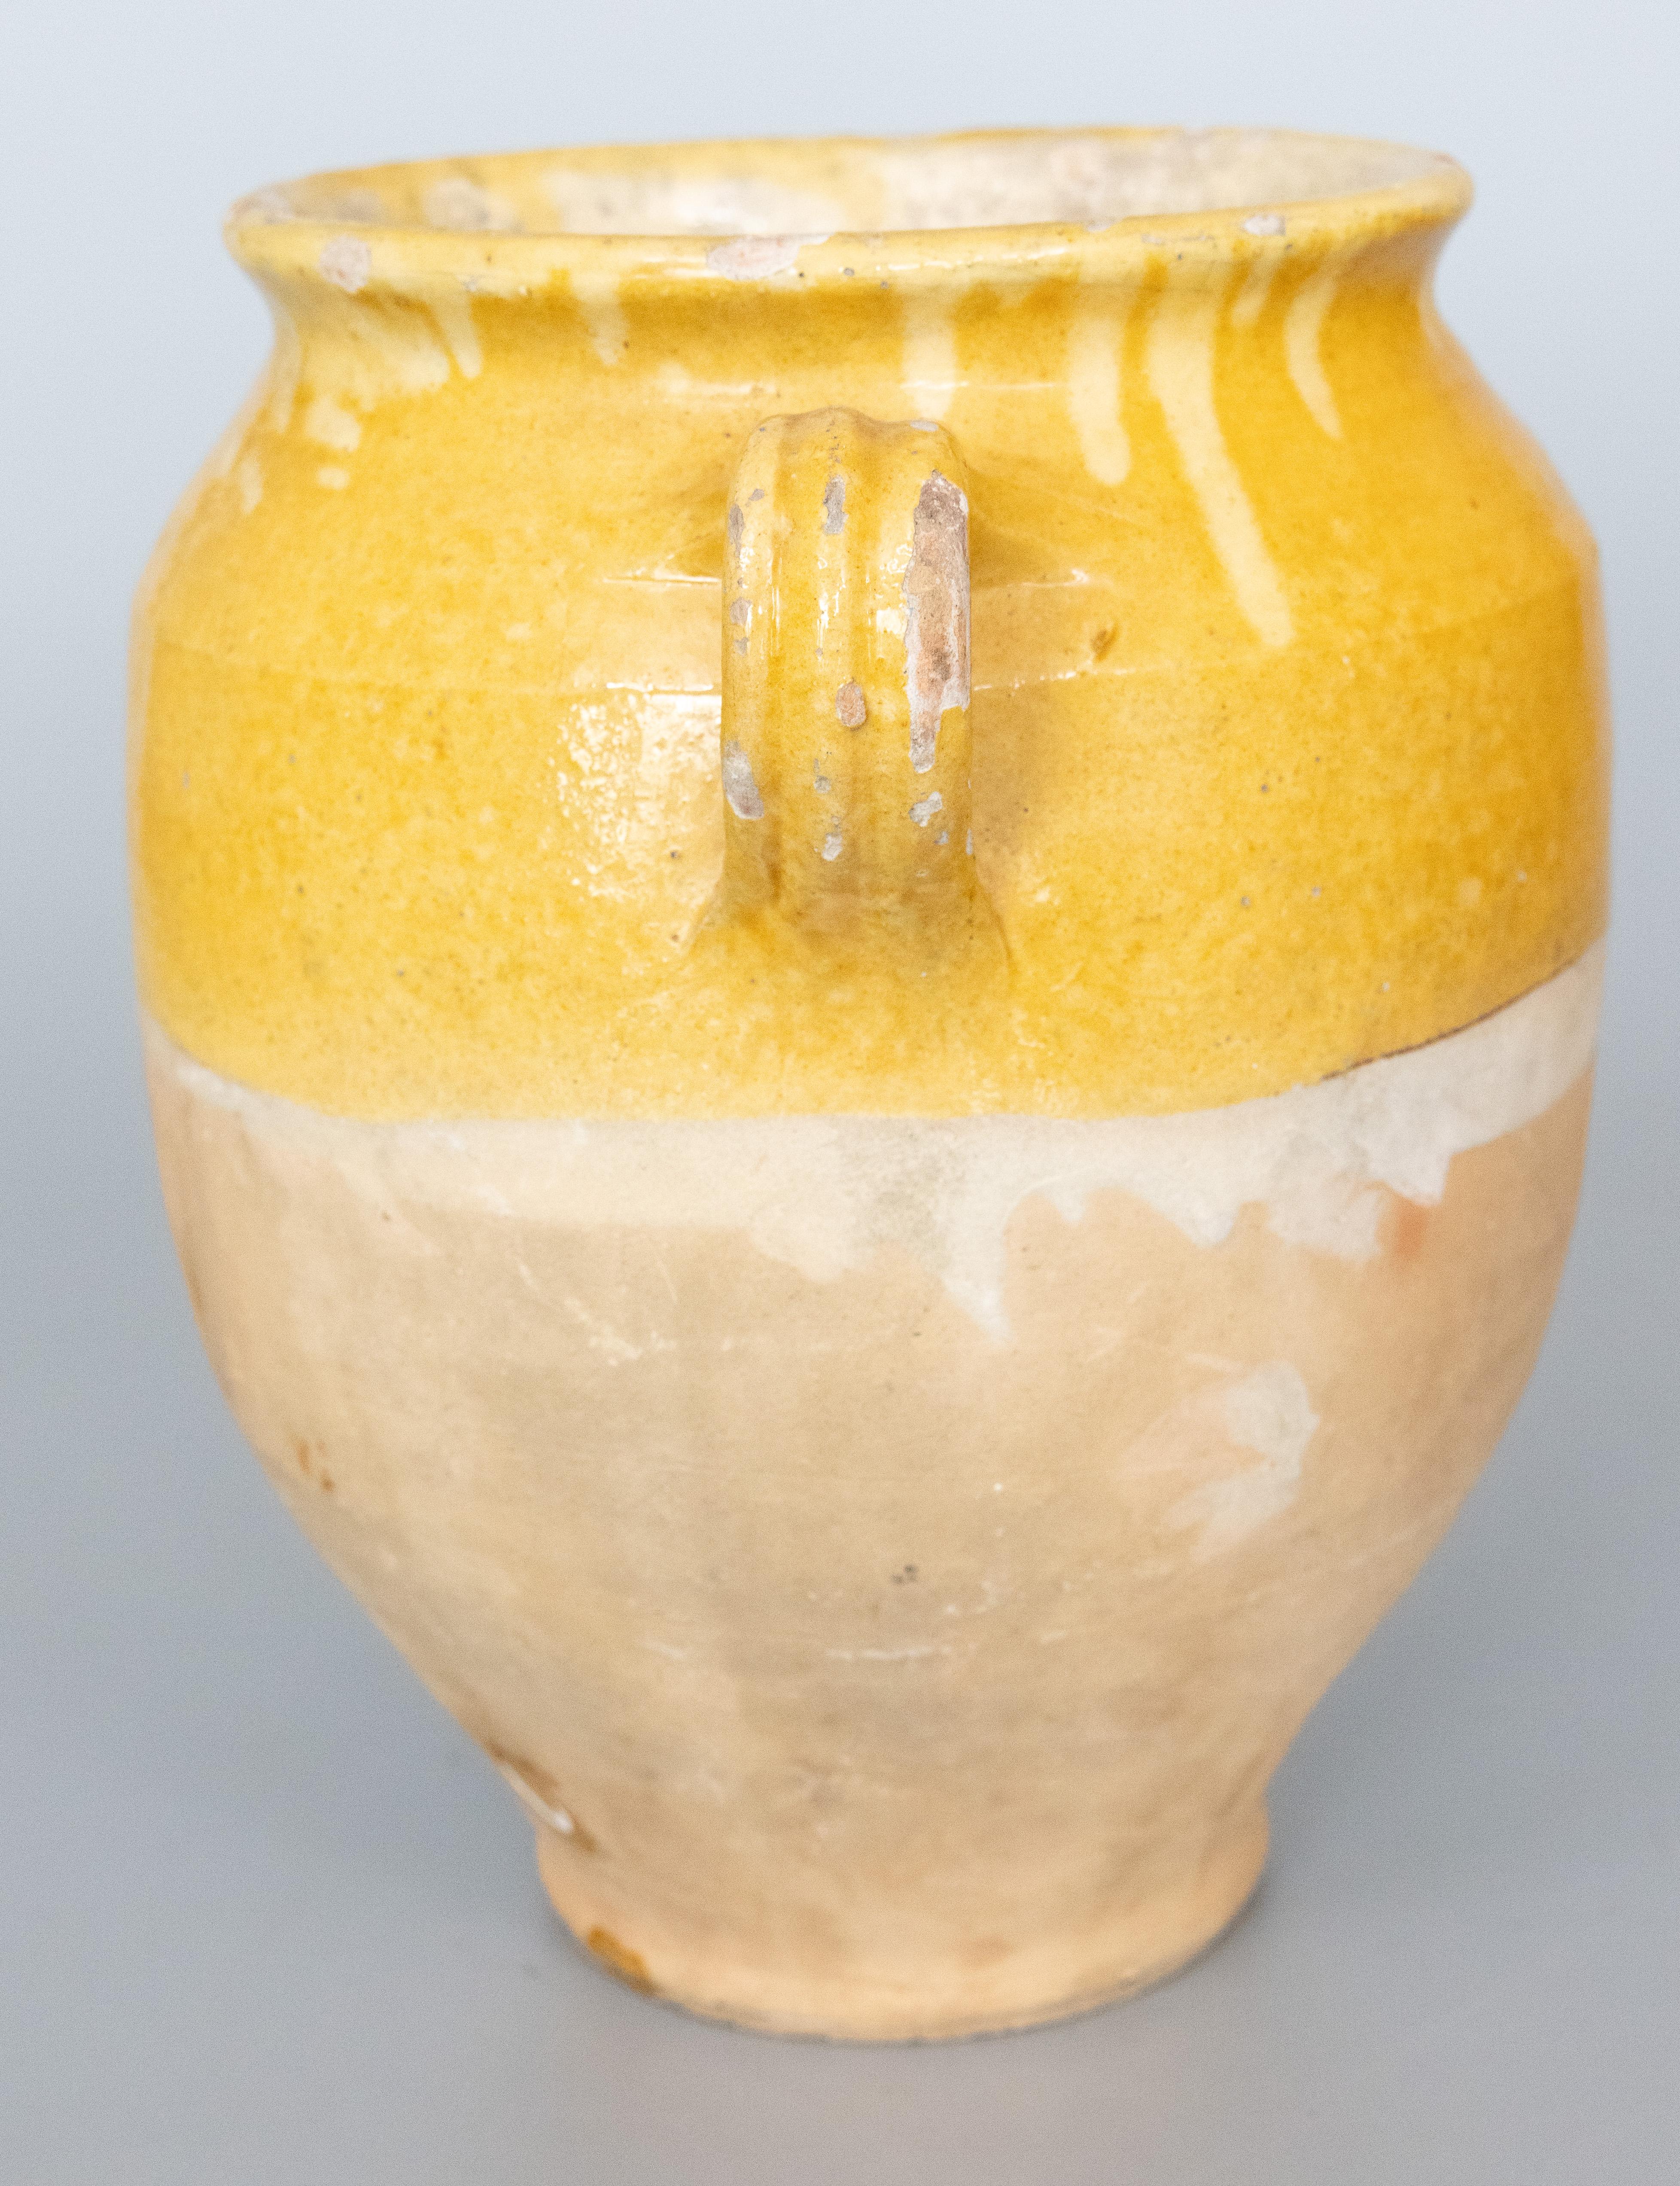 A lovely antique 19th century French confit pot with mustard yellow glaze from the South of France, Castelnaudary. This pot or planter is hand thrown with charming handles known as 'ears'. These jars were used for storing and preserving cooked meat.